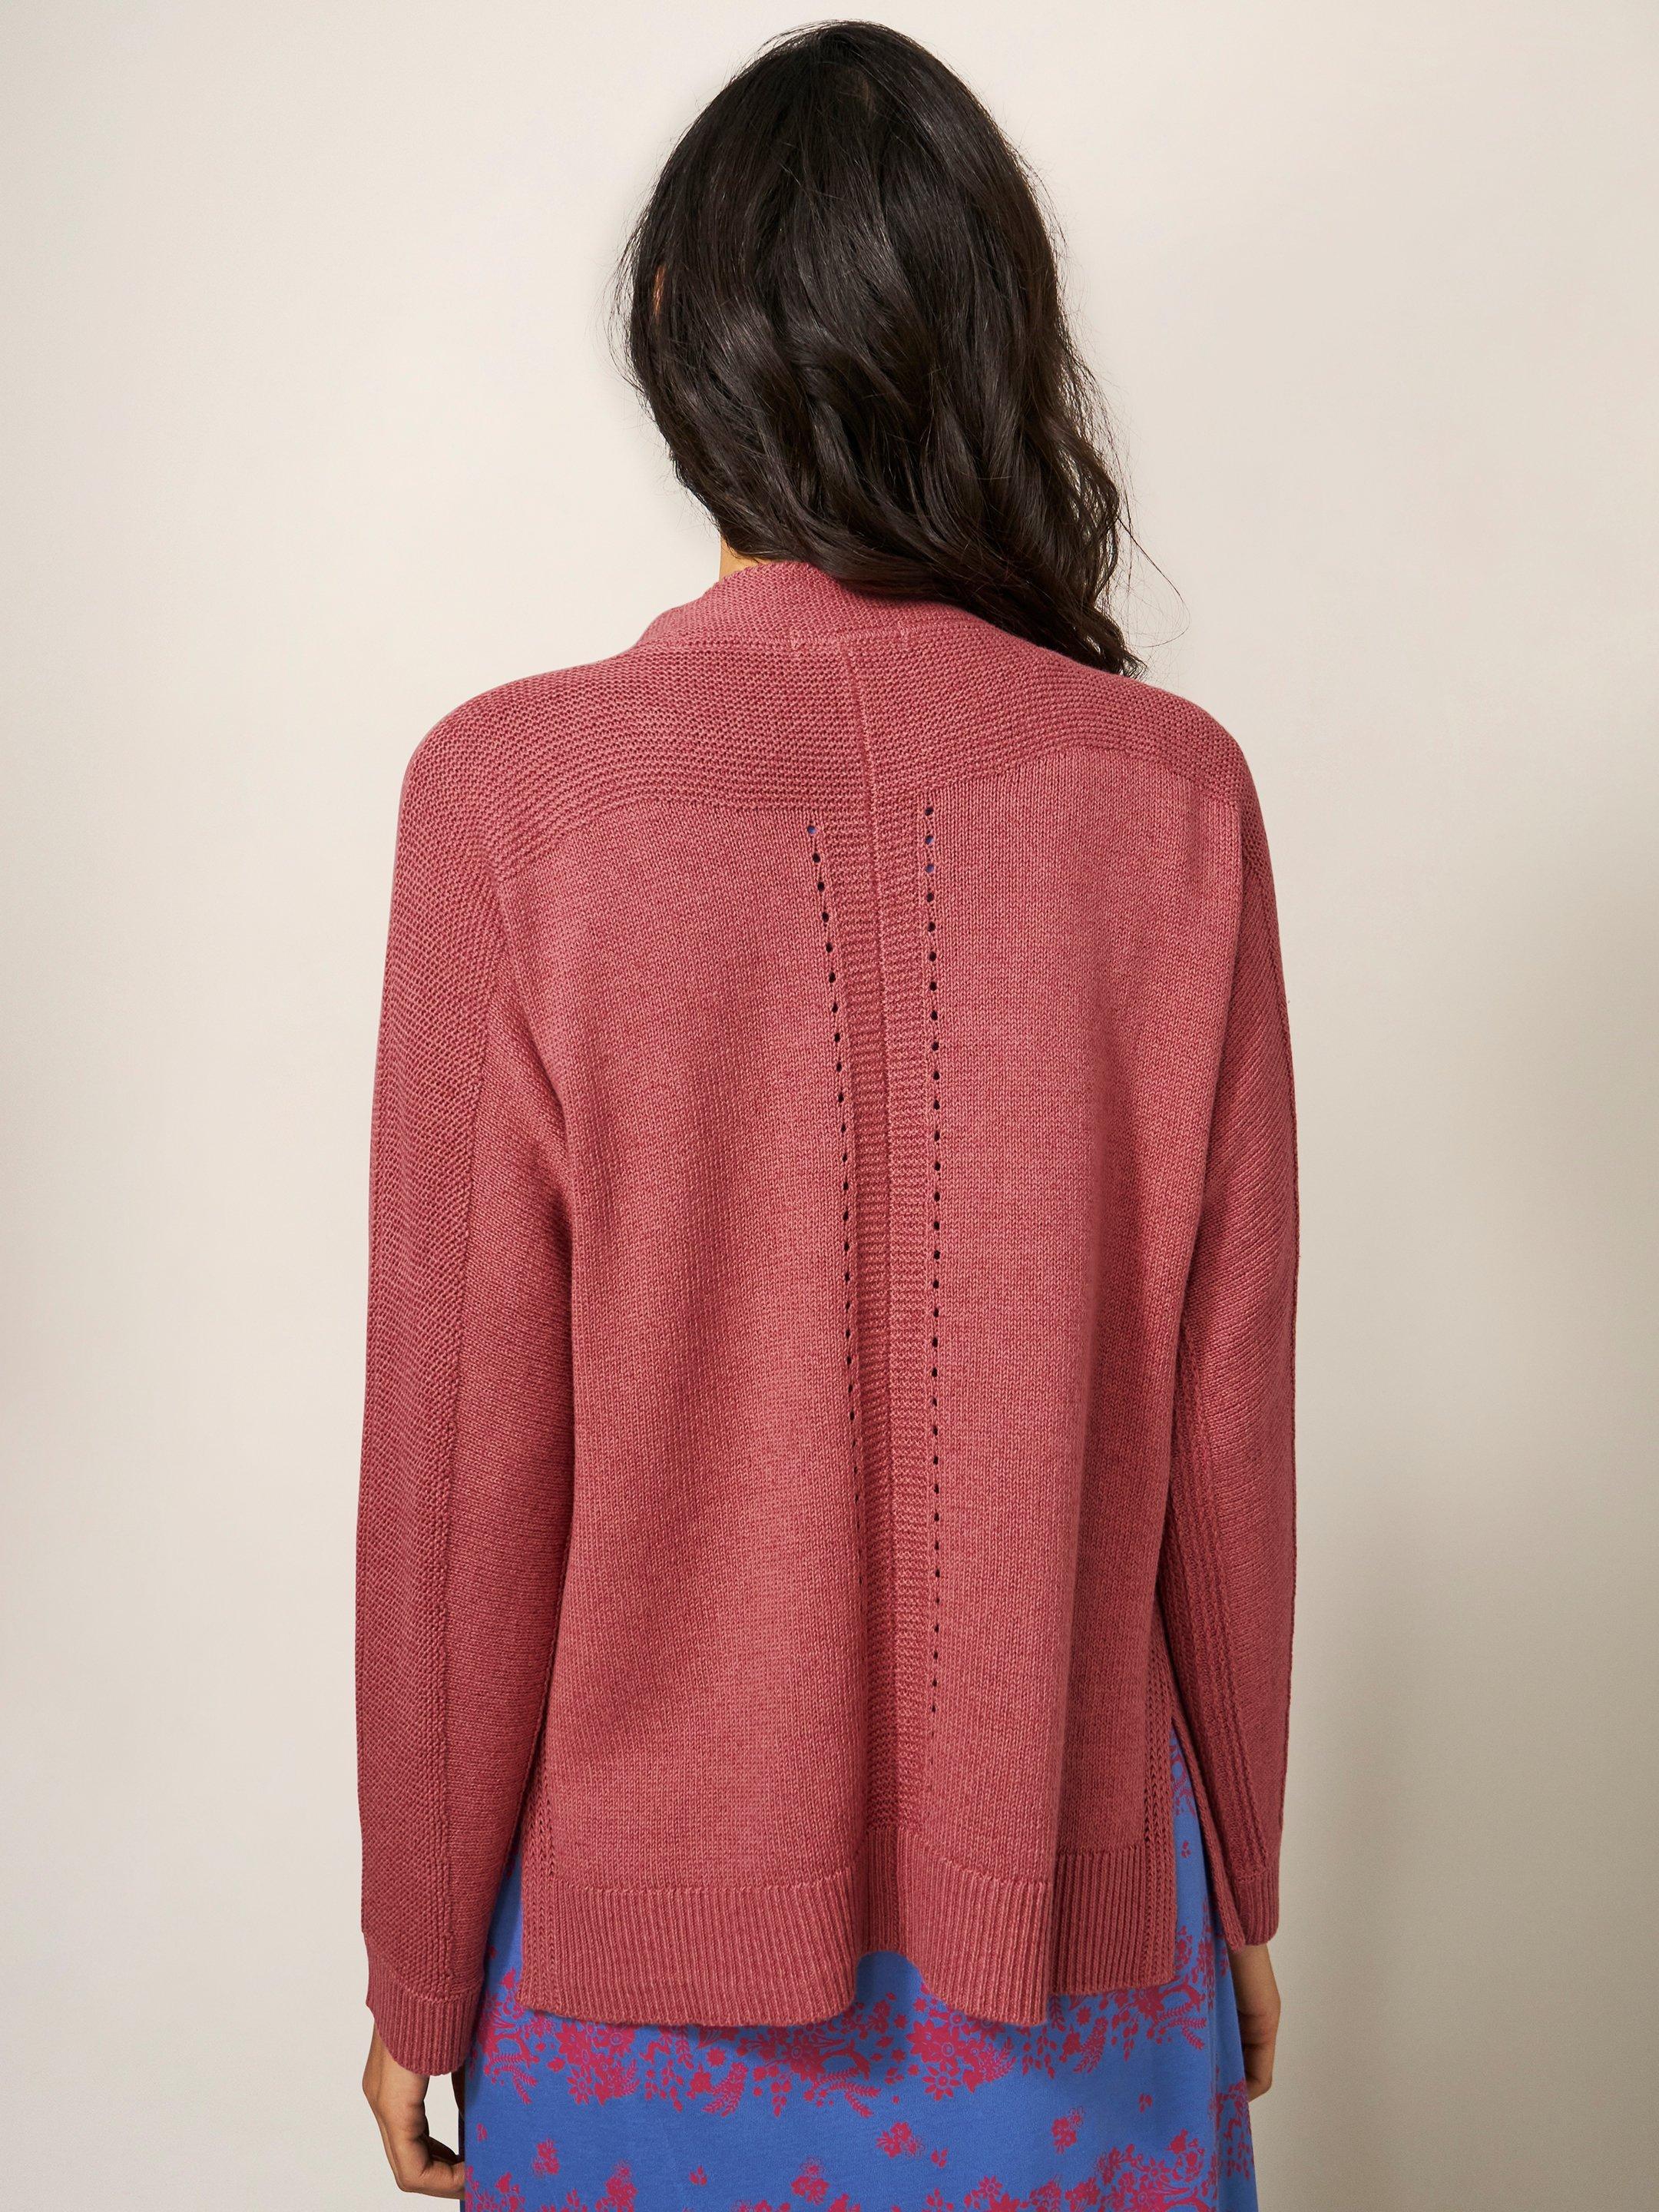 Tiana Open Neck Cardi in MID PINK - MODEL BACK